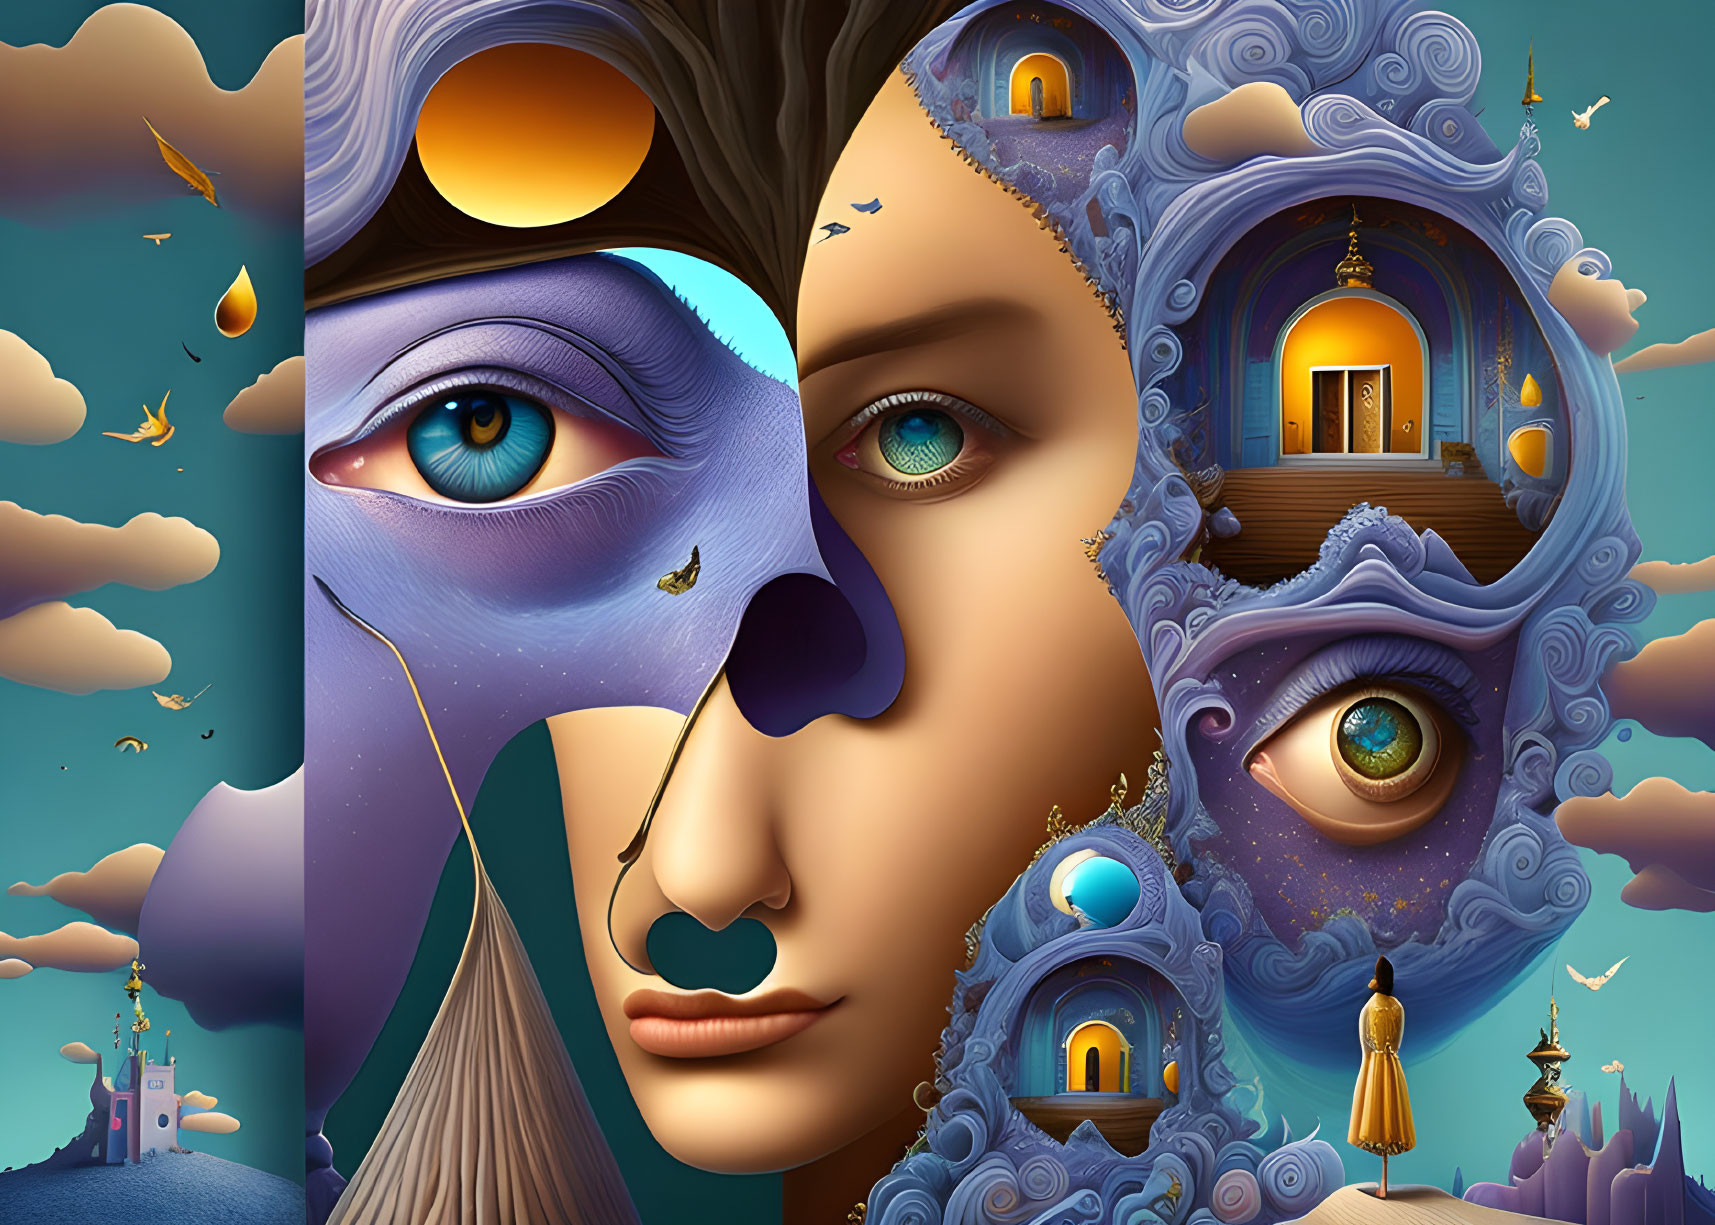 Surreal Artwork: Faces with Architectural and Natural Elements